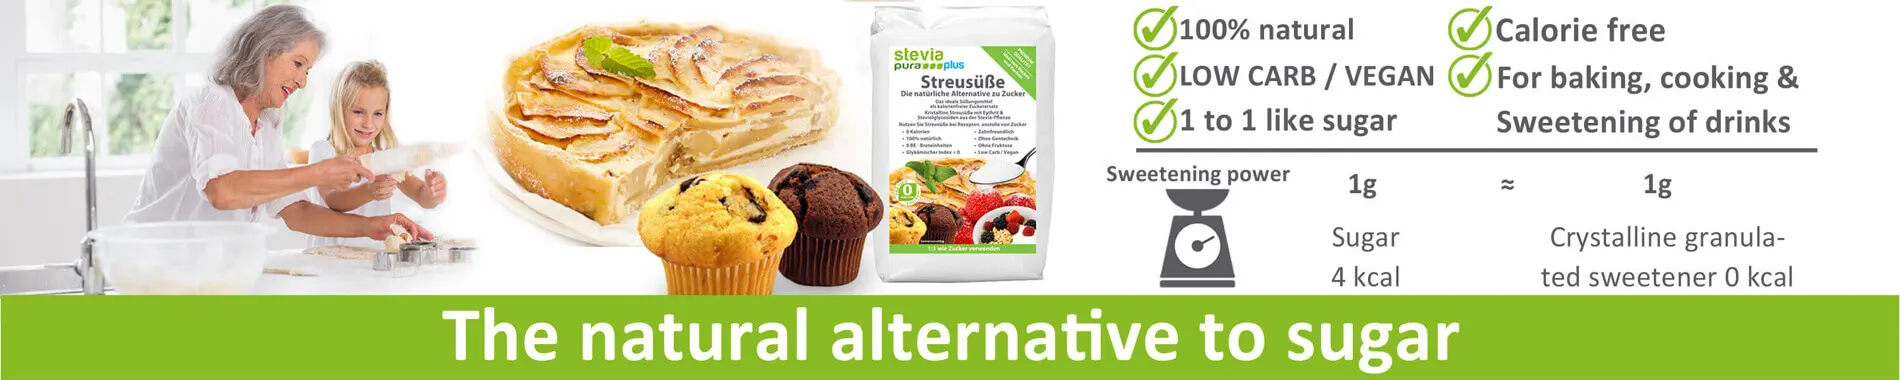 Calorie-free sweetener Erythritol and Stevia granulated...